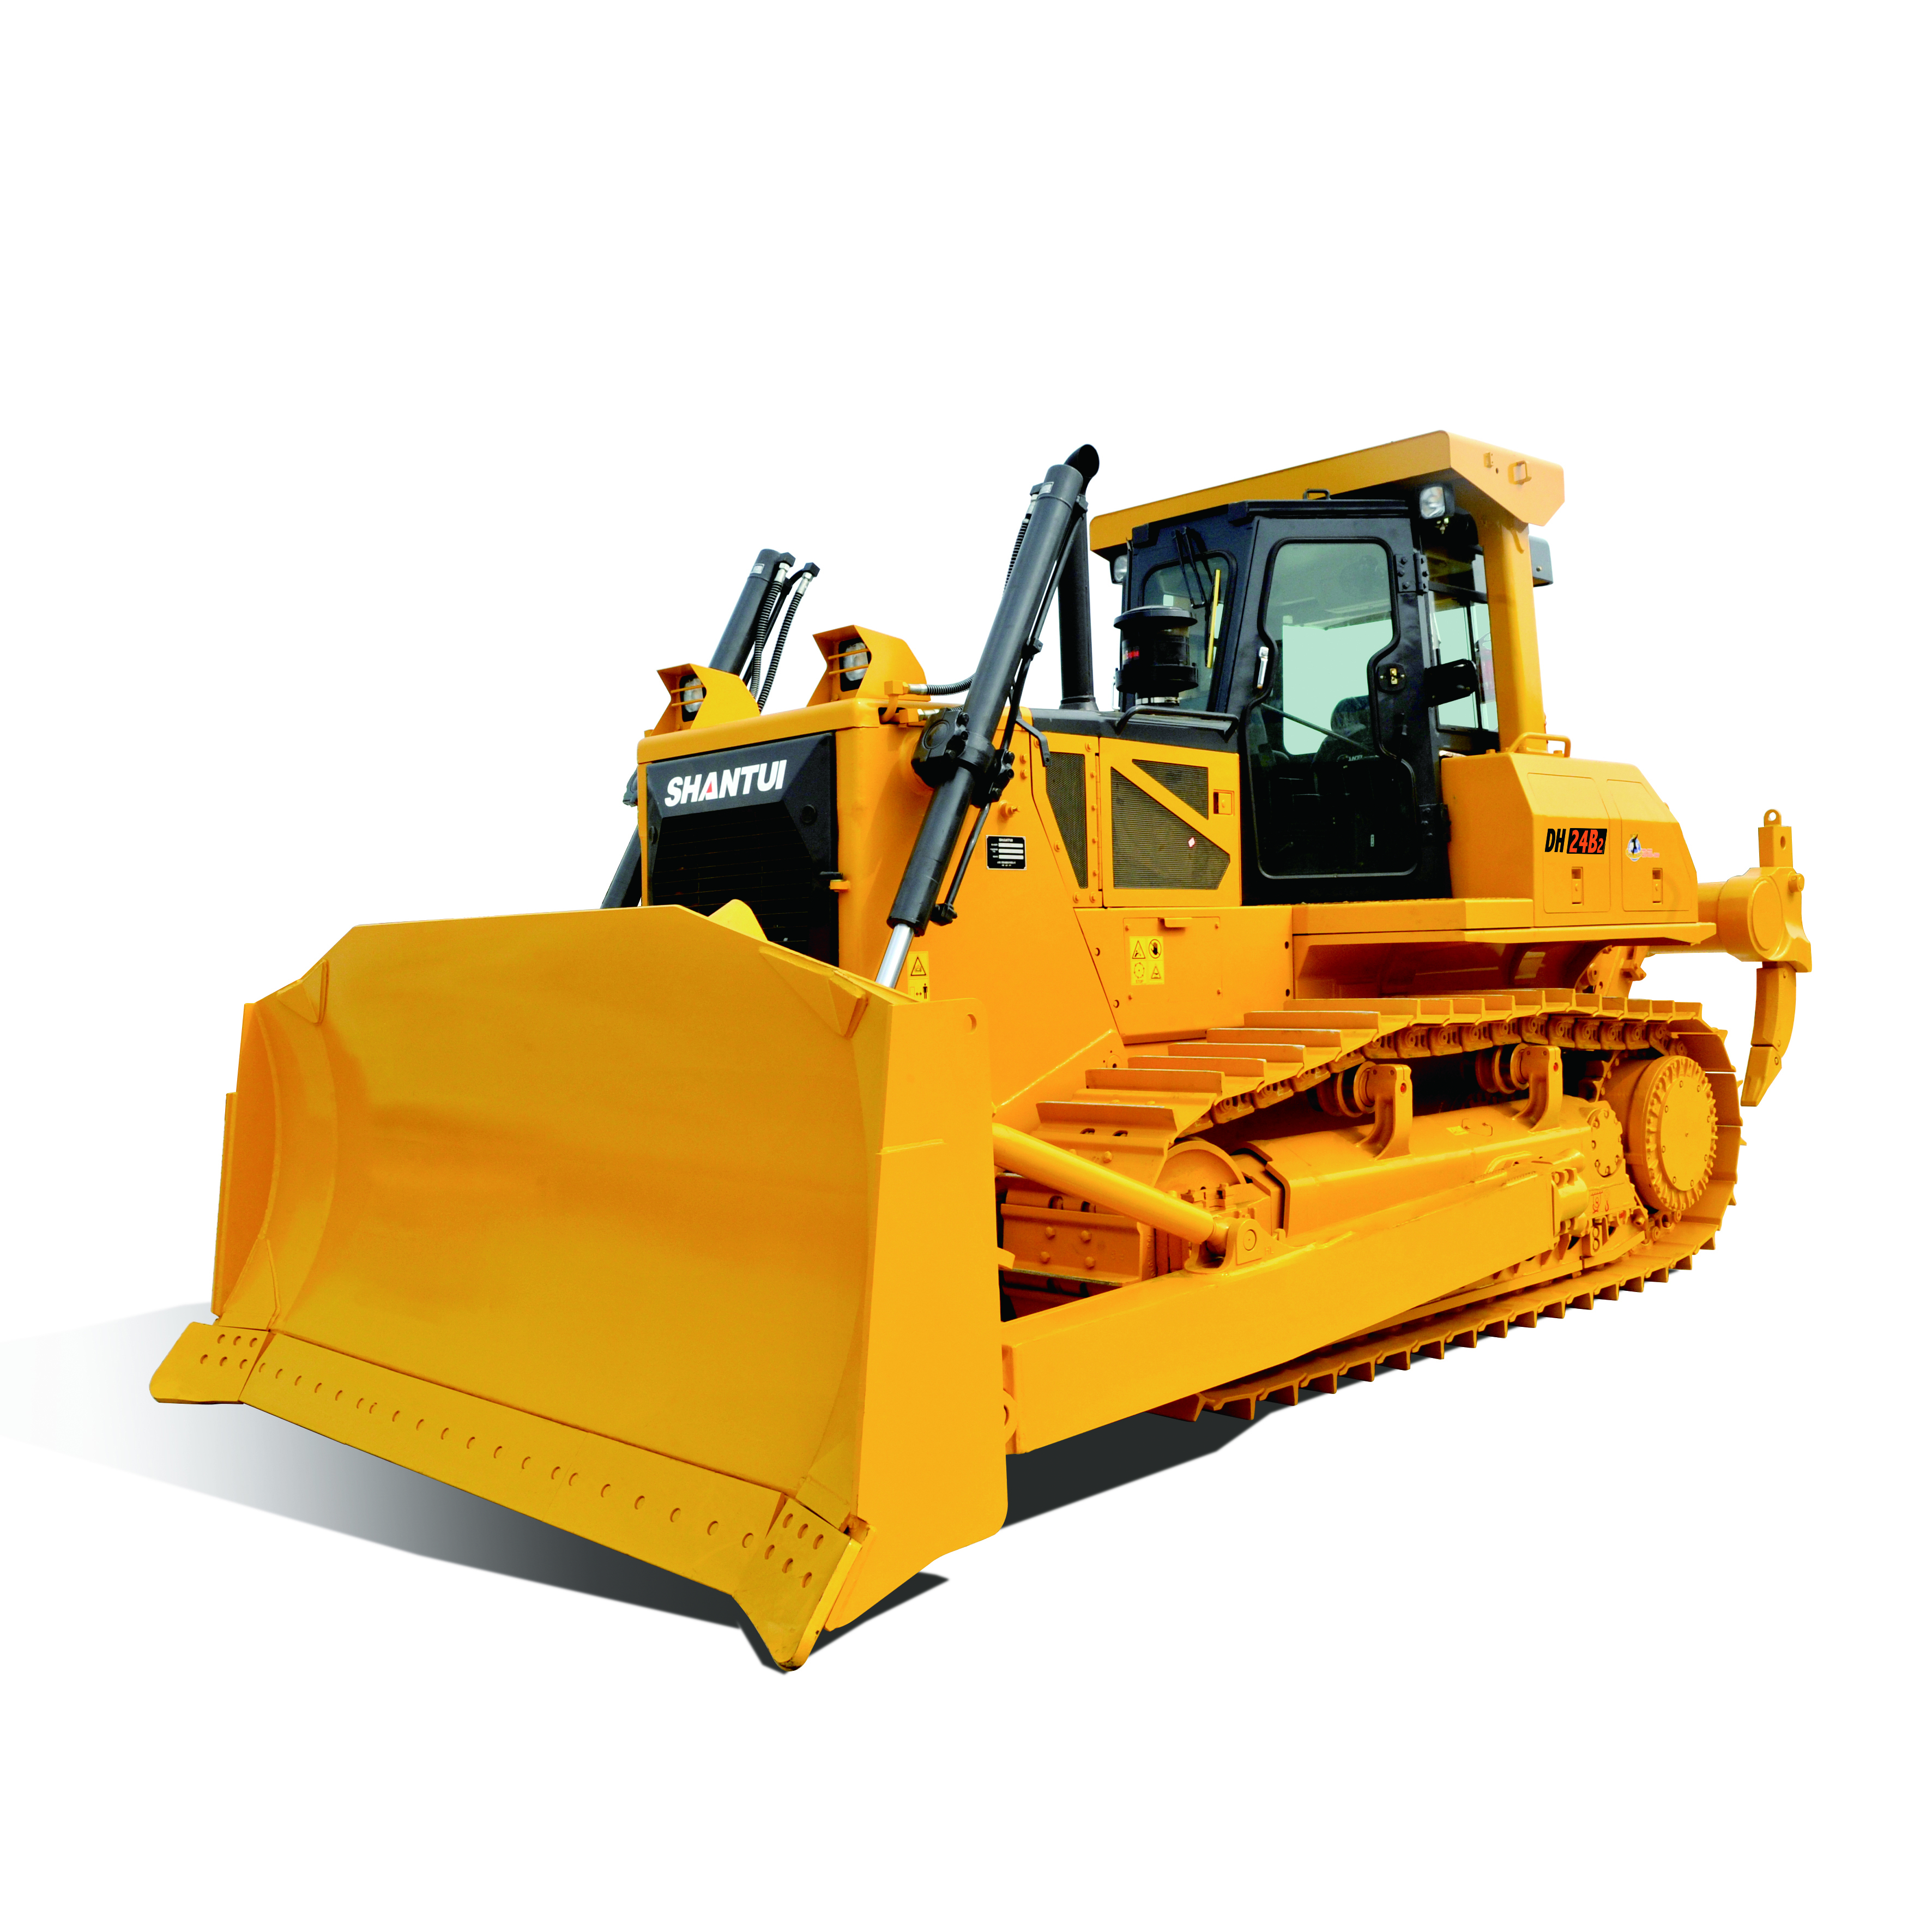 Personlized Products Bulldozers - Shantui 24ton Bulldozer 240Hp Dh24-b2 With Rear Ripper – China Construction